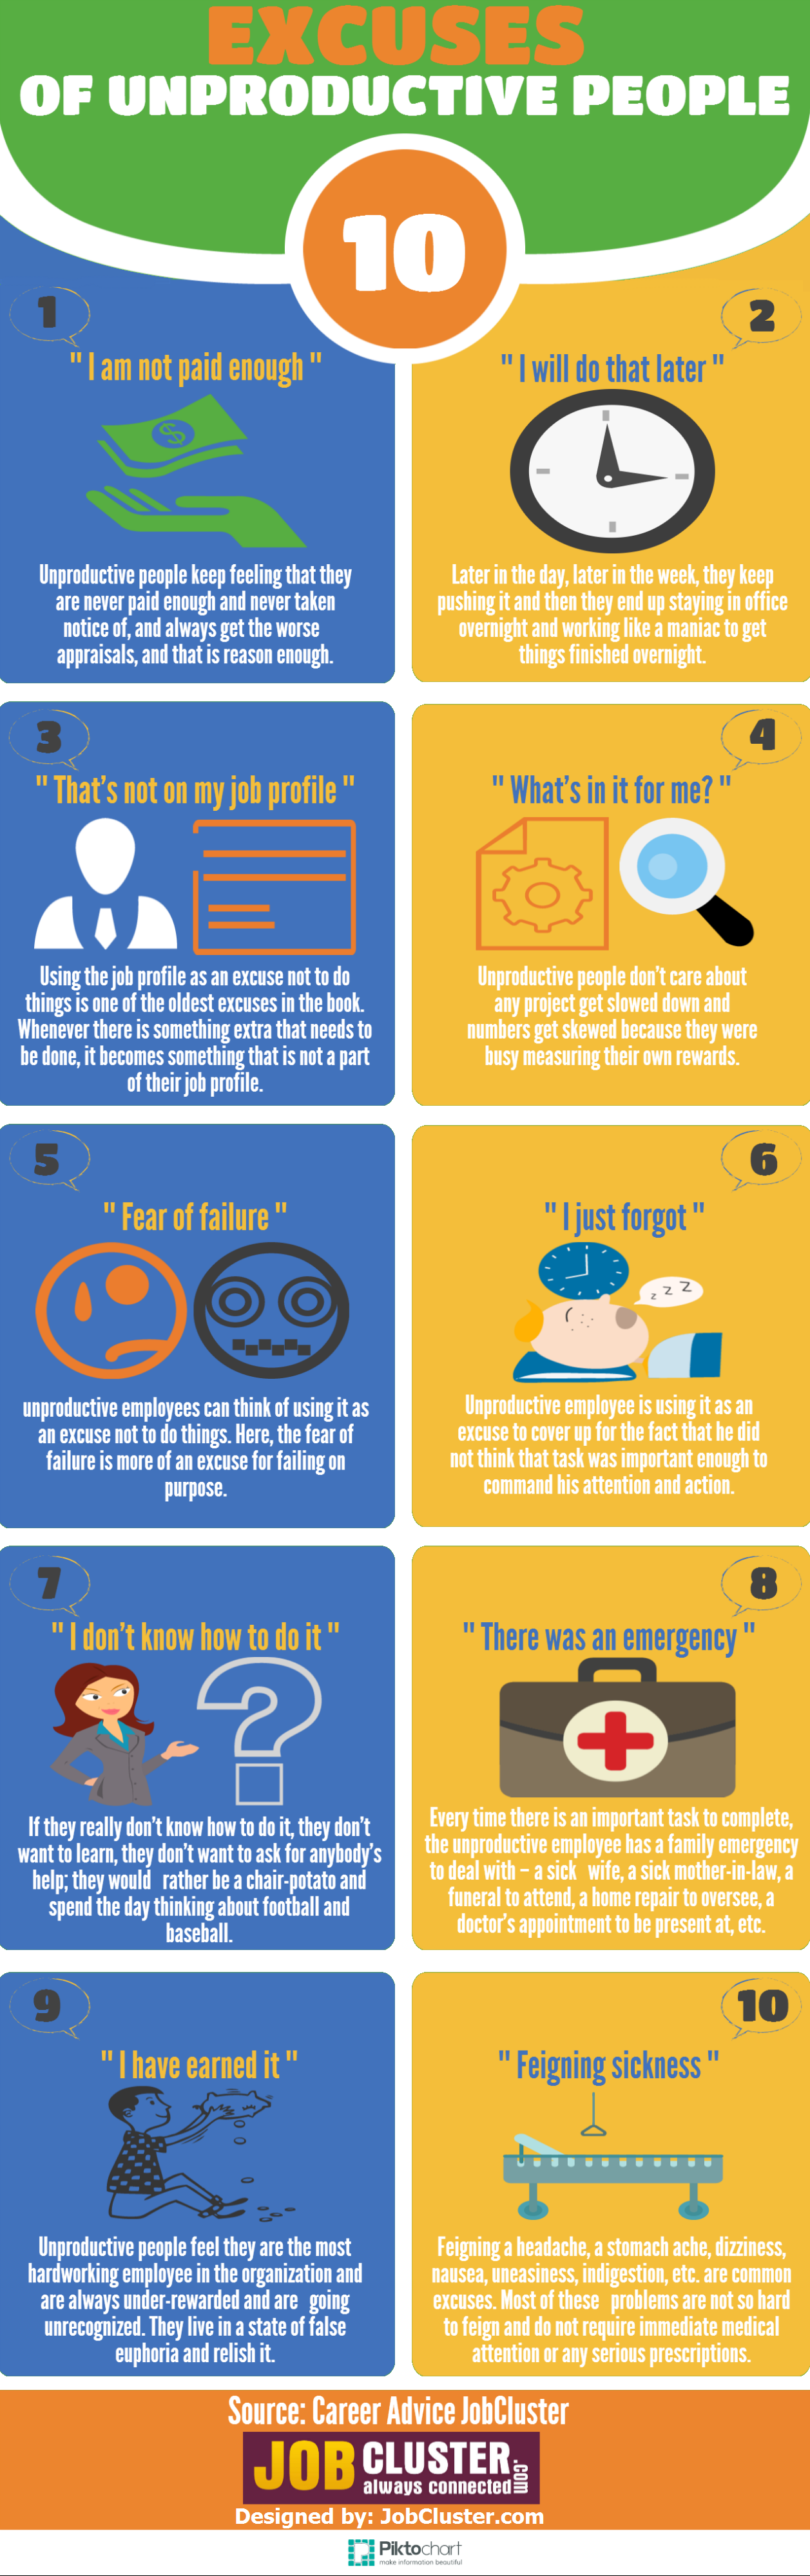 10 Excuses of unproductive people-Infographic